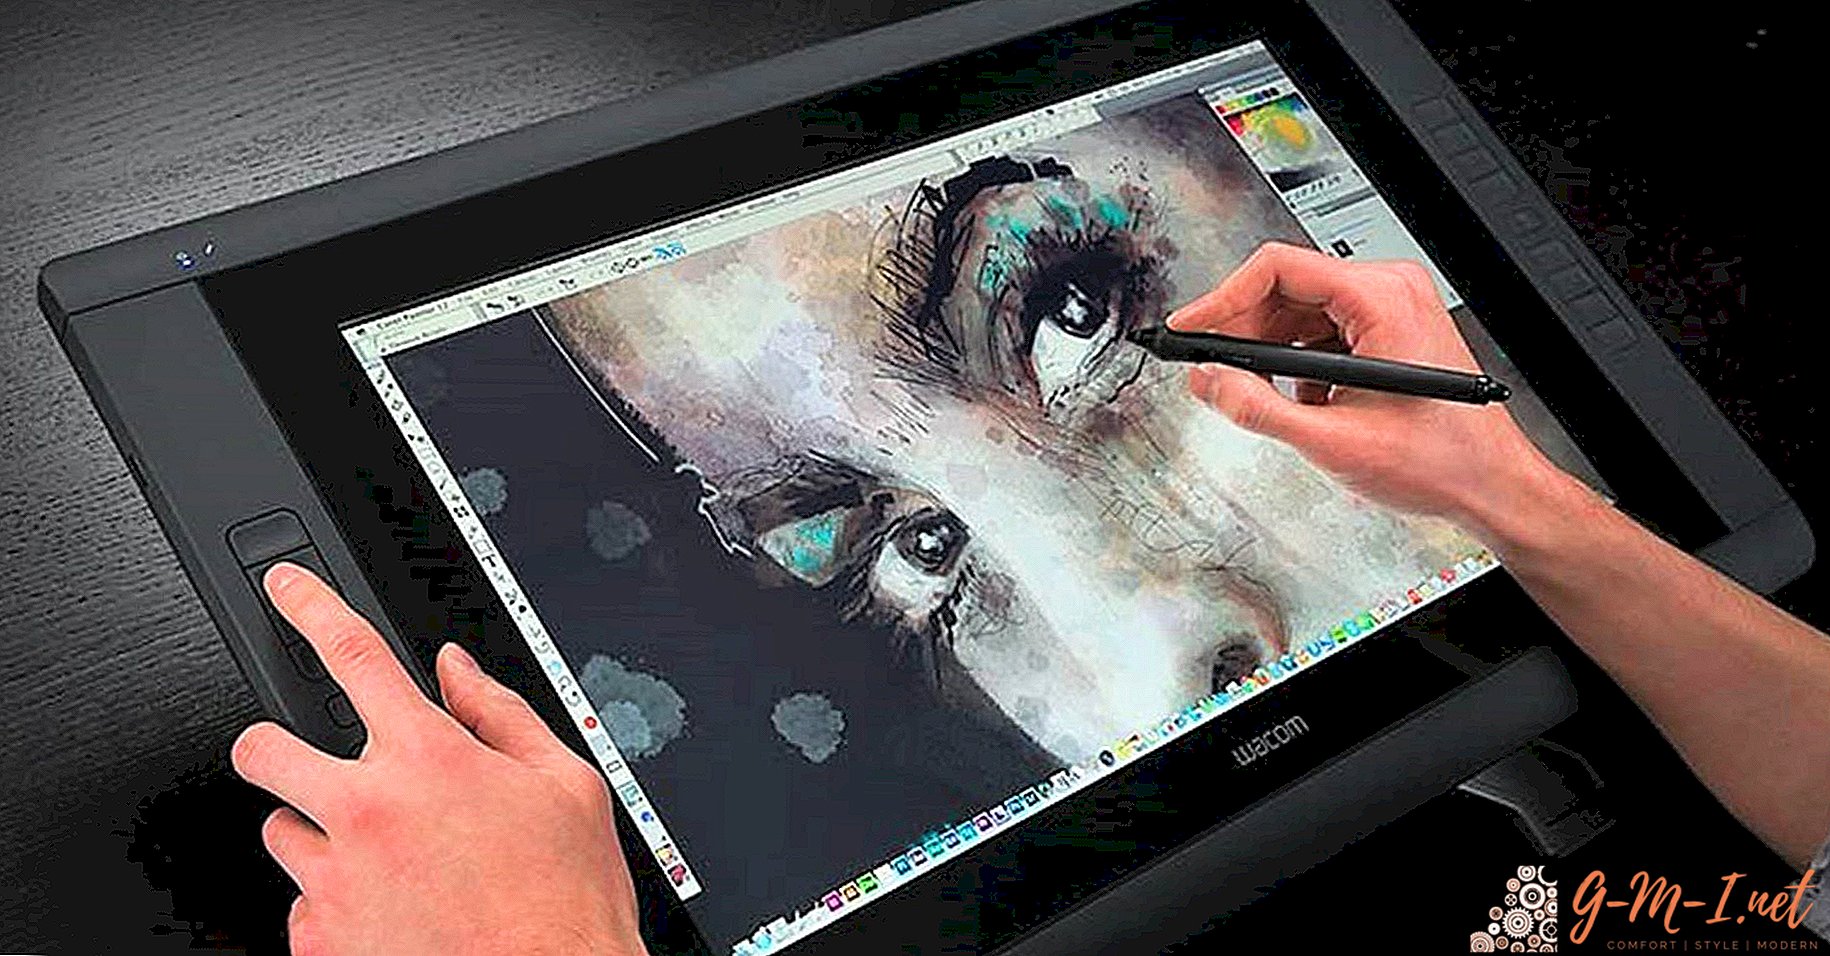 How to draw on a graphics tablet